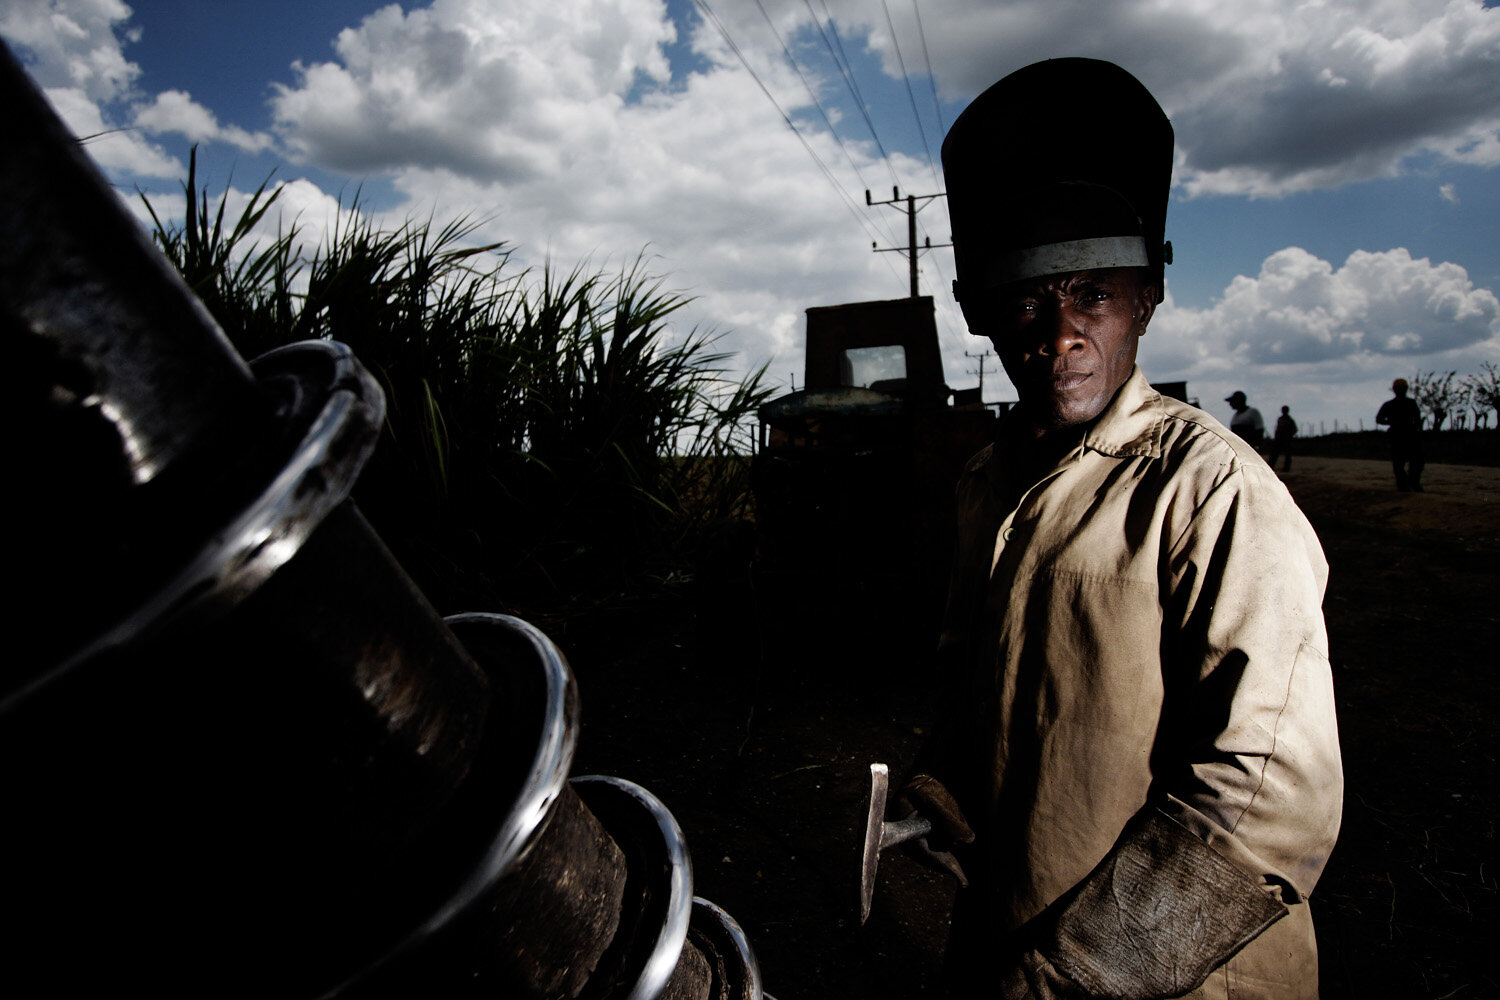  Pedro, 47, welder, gets ready to weld a harvester. Pedro has been working for 12 years  in the sugarcane industry.  